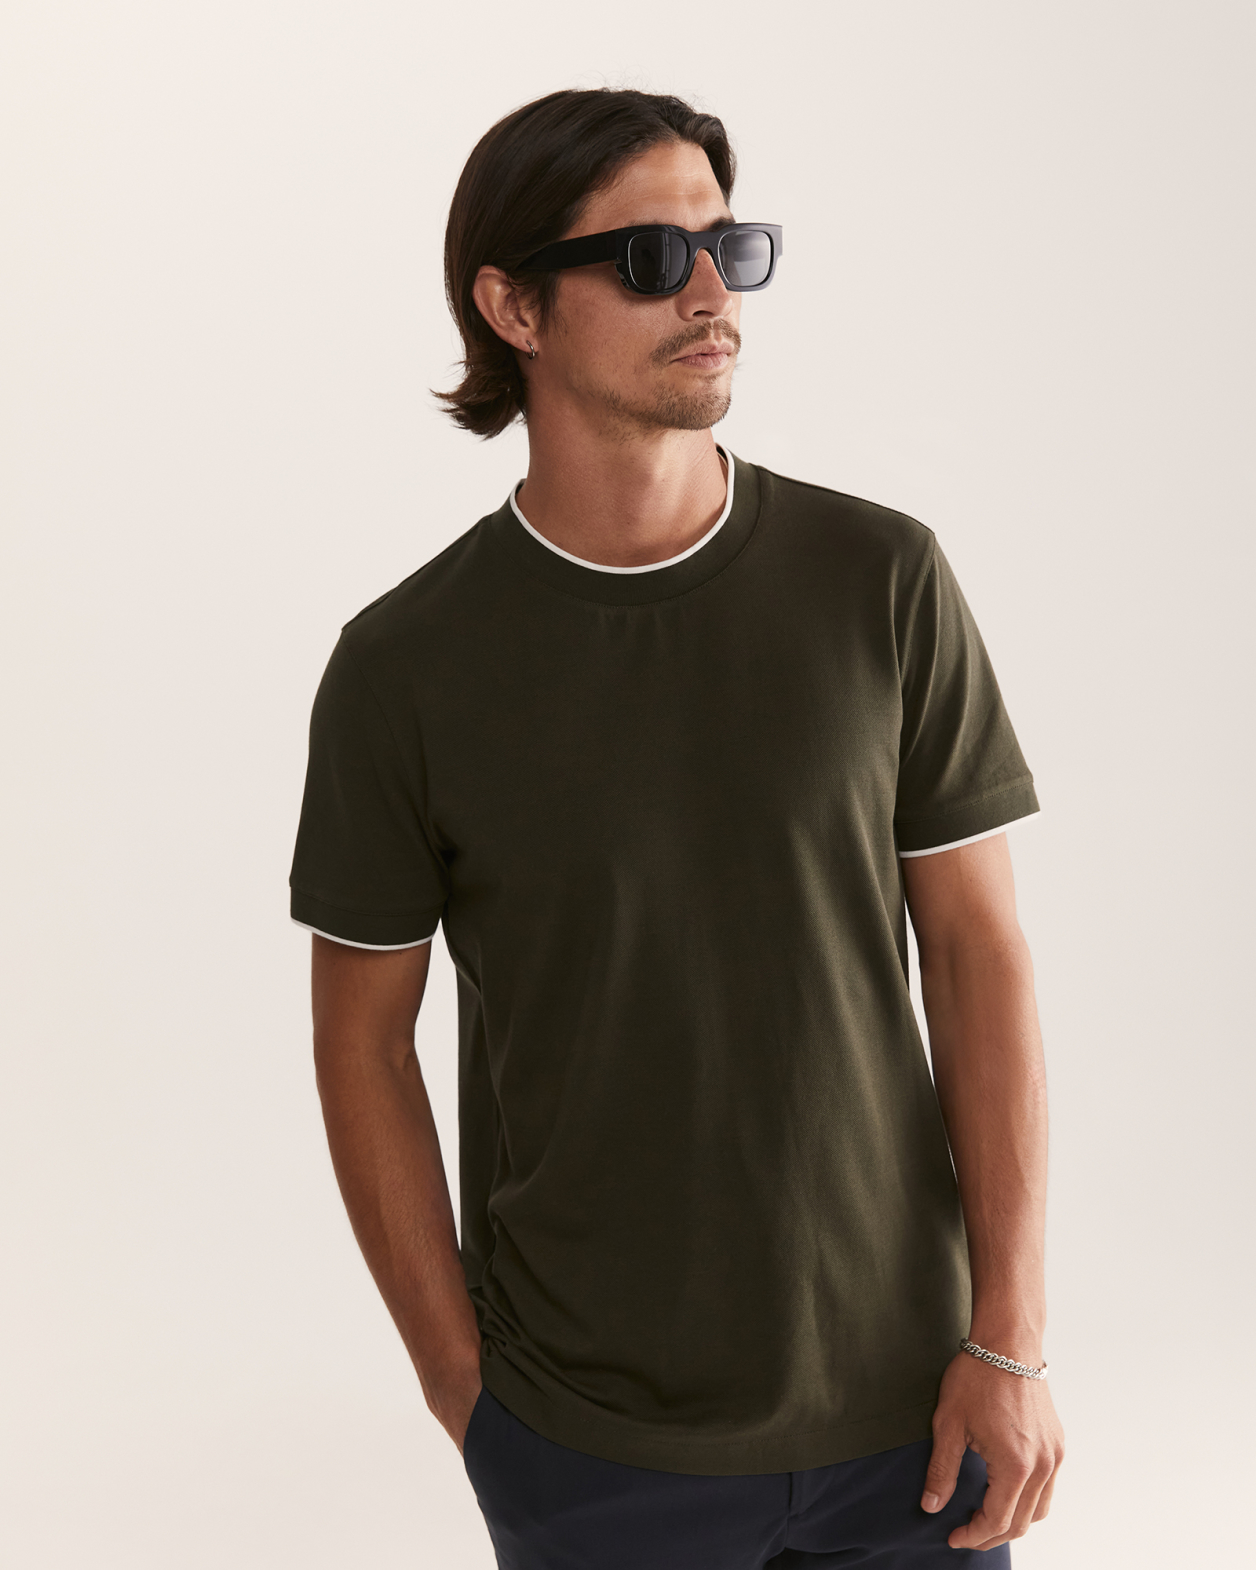 Andy Tipped Crew in KHAKI